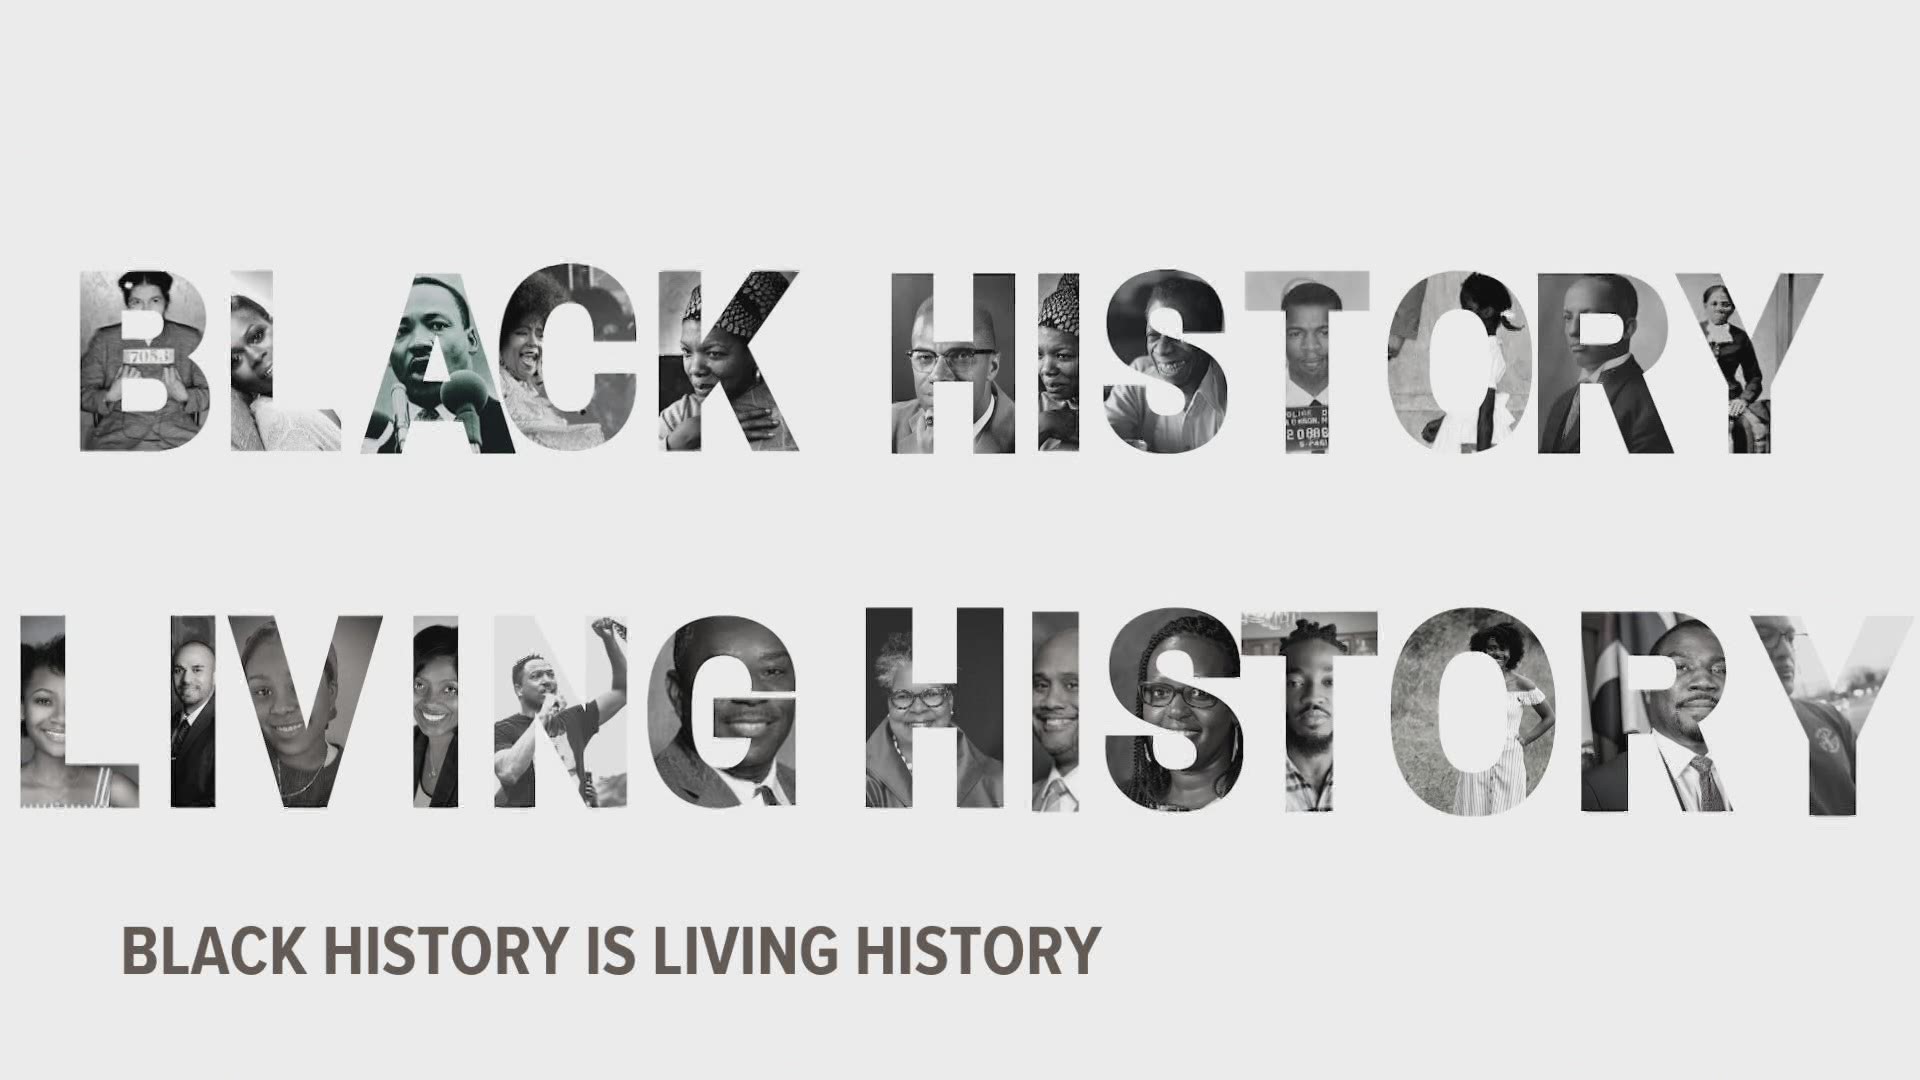 The reason for the "Black History is Living History" series is to show others that Black history is more than showcasing events and leaders from the past.